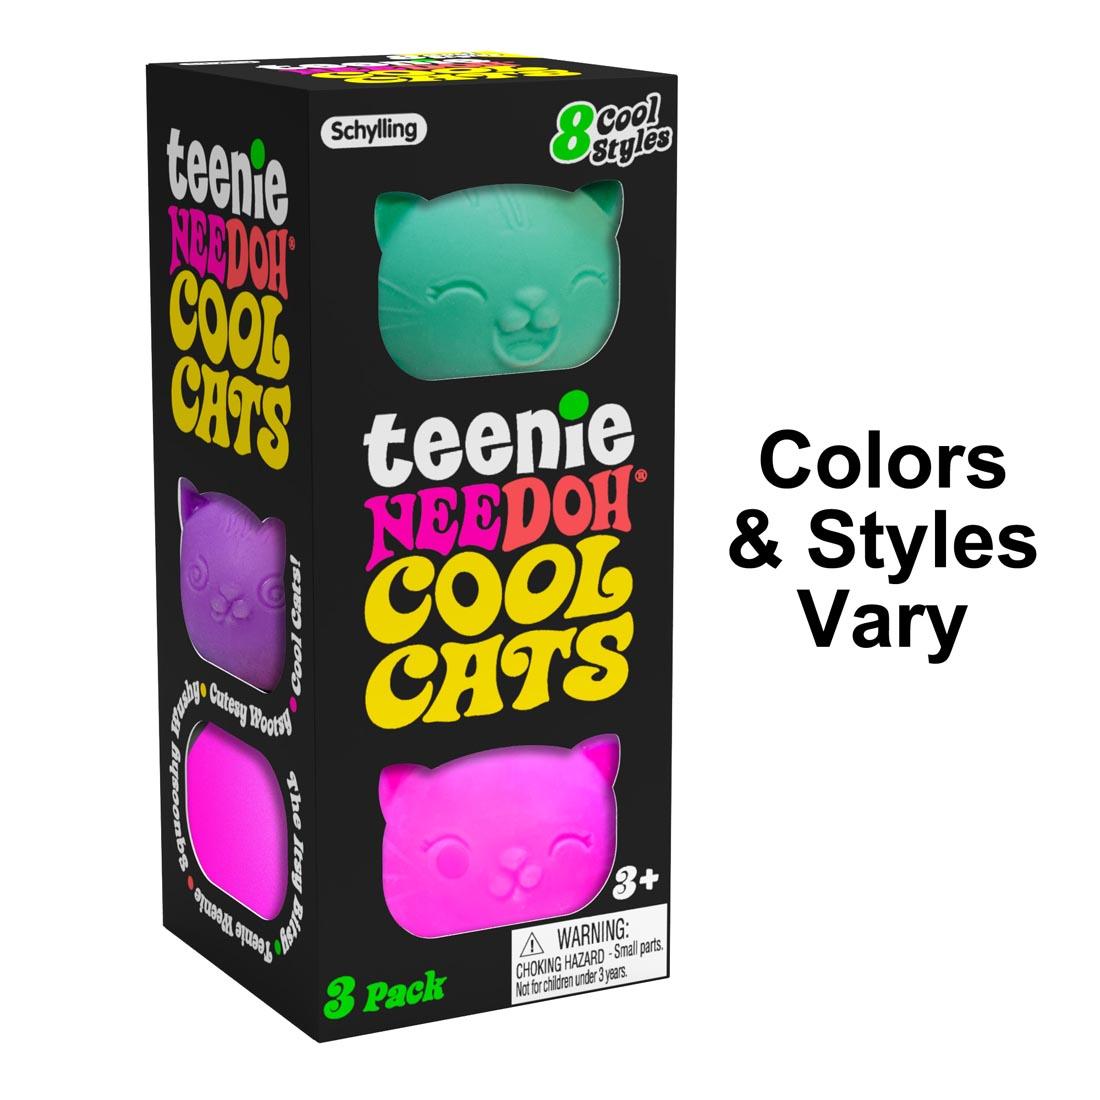 Teenie Nee Doh Cool Cats 3 Pack, with the words "colors & styles vary"